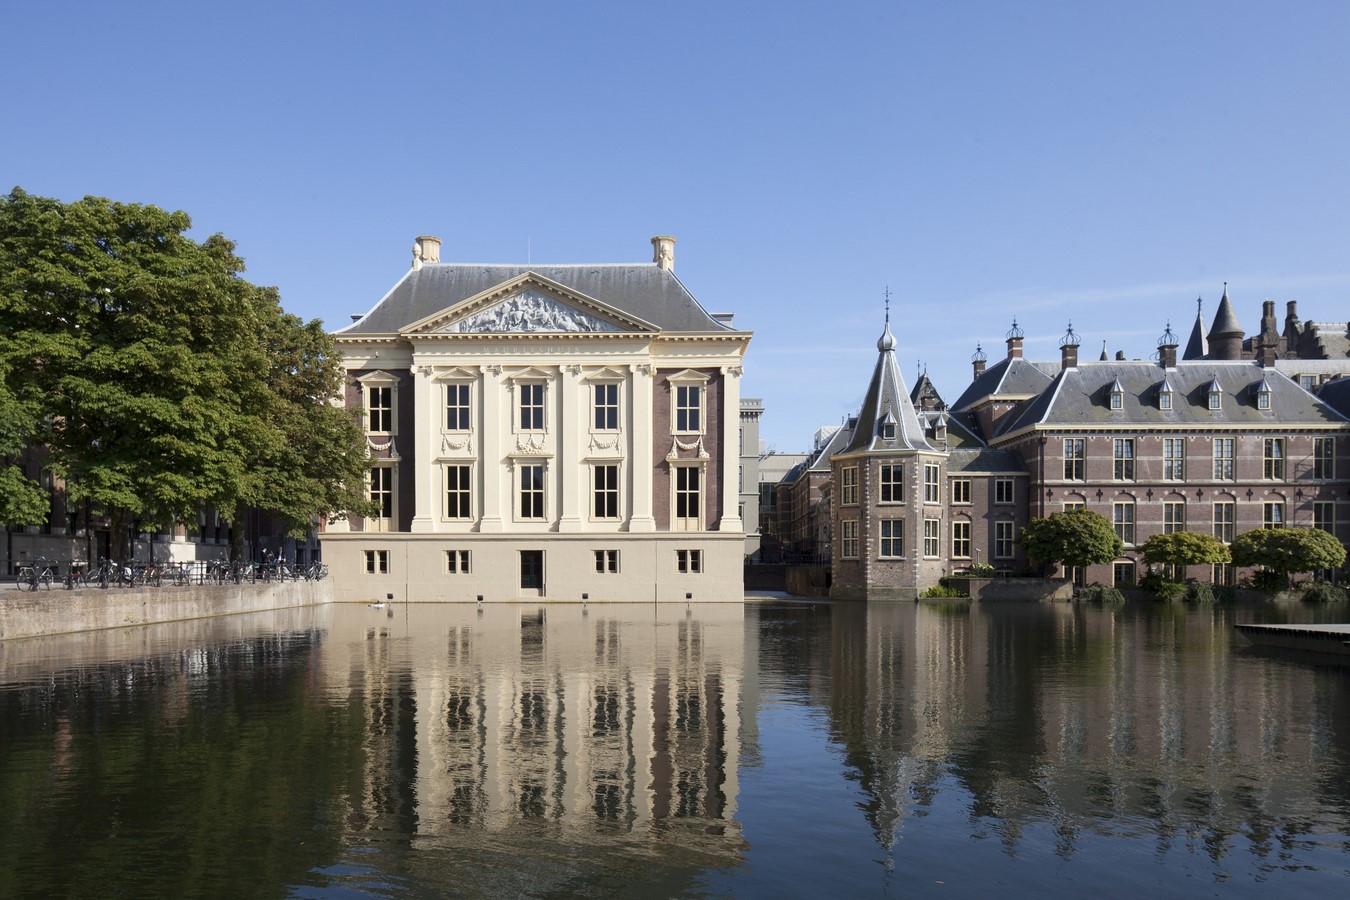 Museums of the World: Mauritshuis in The Hague, Netherlands - Sheet1